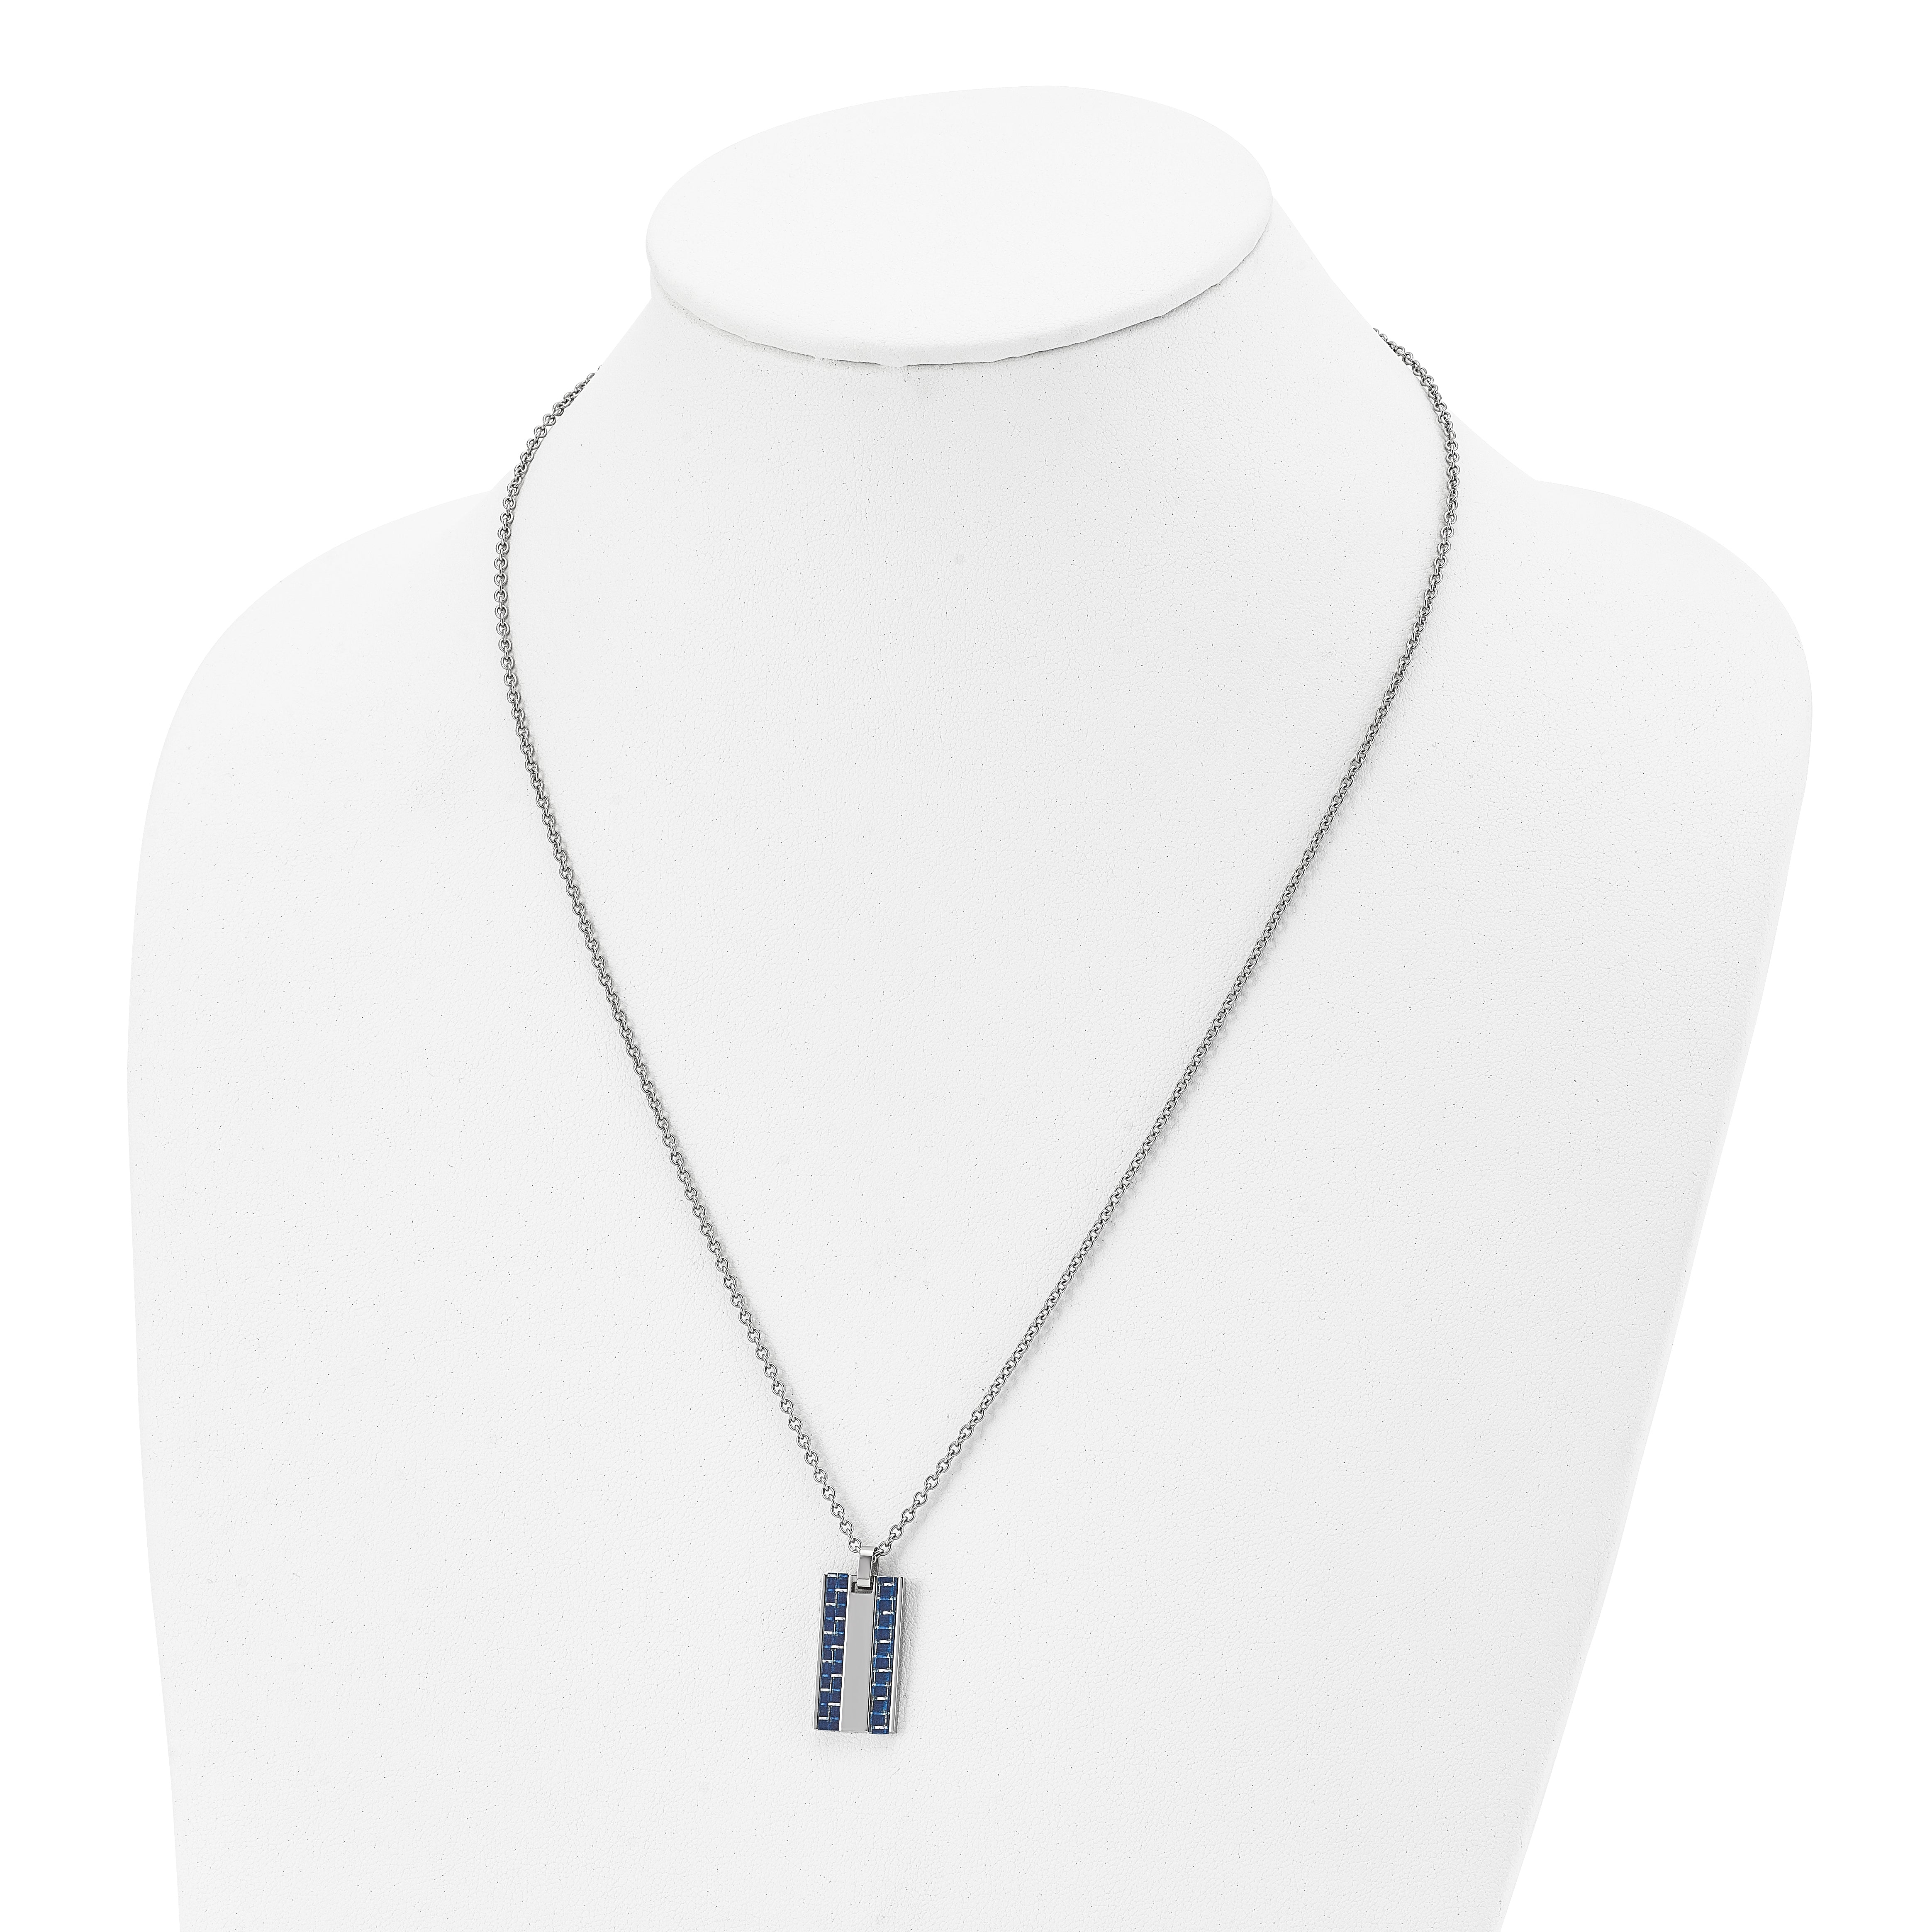 Chisel Stainless Steel Polished with Blue Carbon Fiber Inlay Dog Tag on a 22 inch Cable Chain Necklace